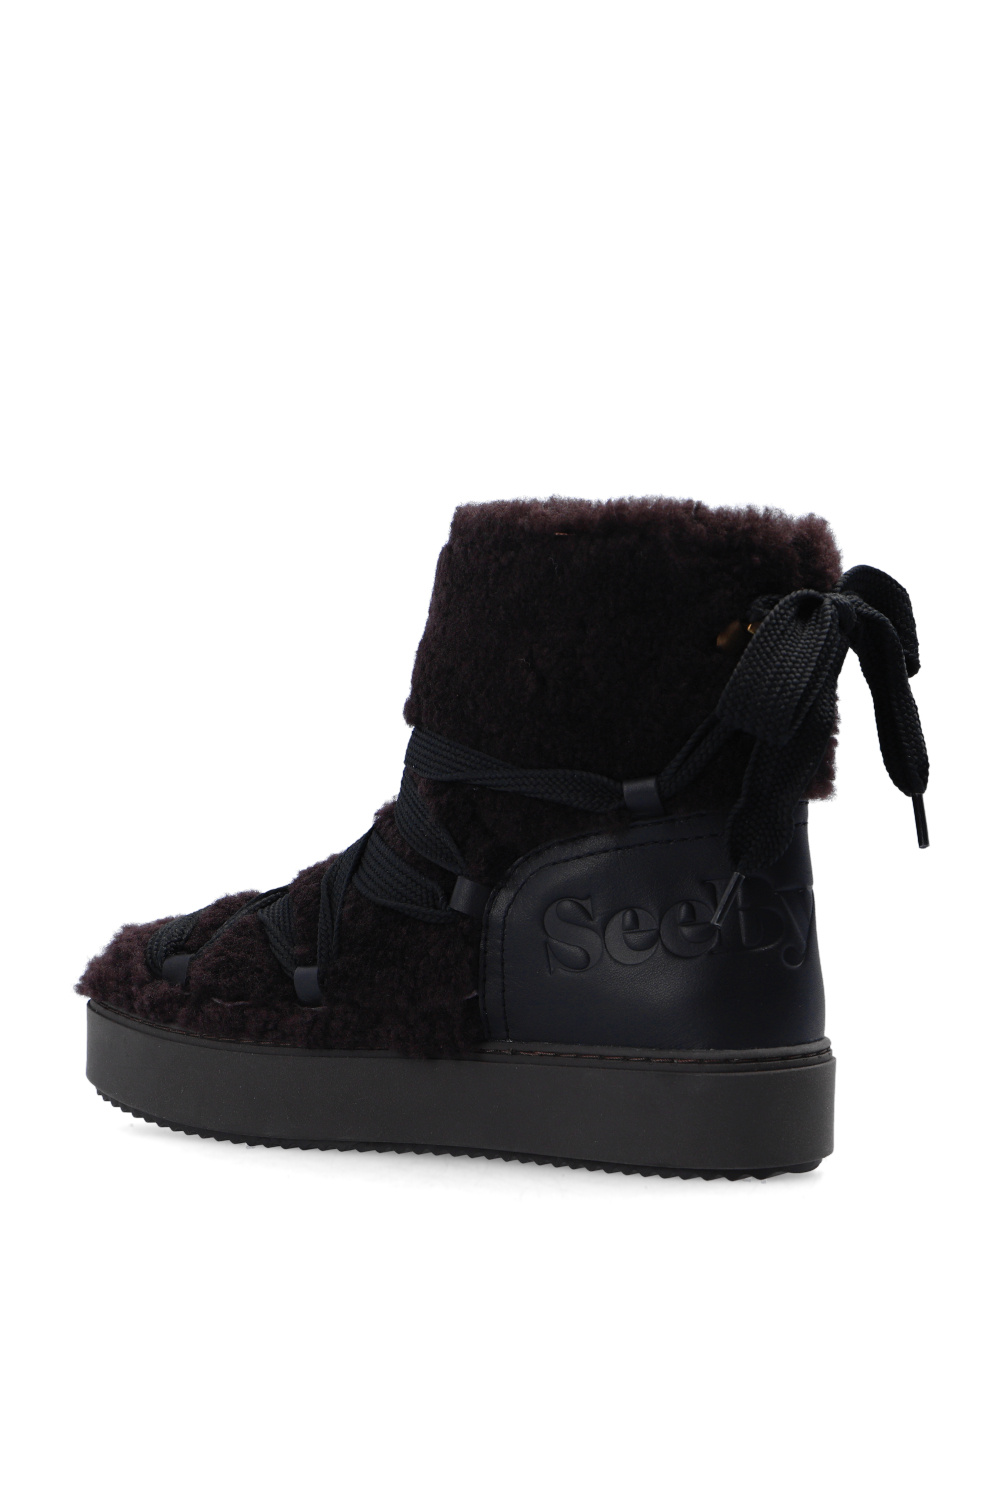 See By Chloe 'Mary' snow boots